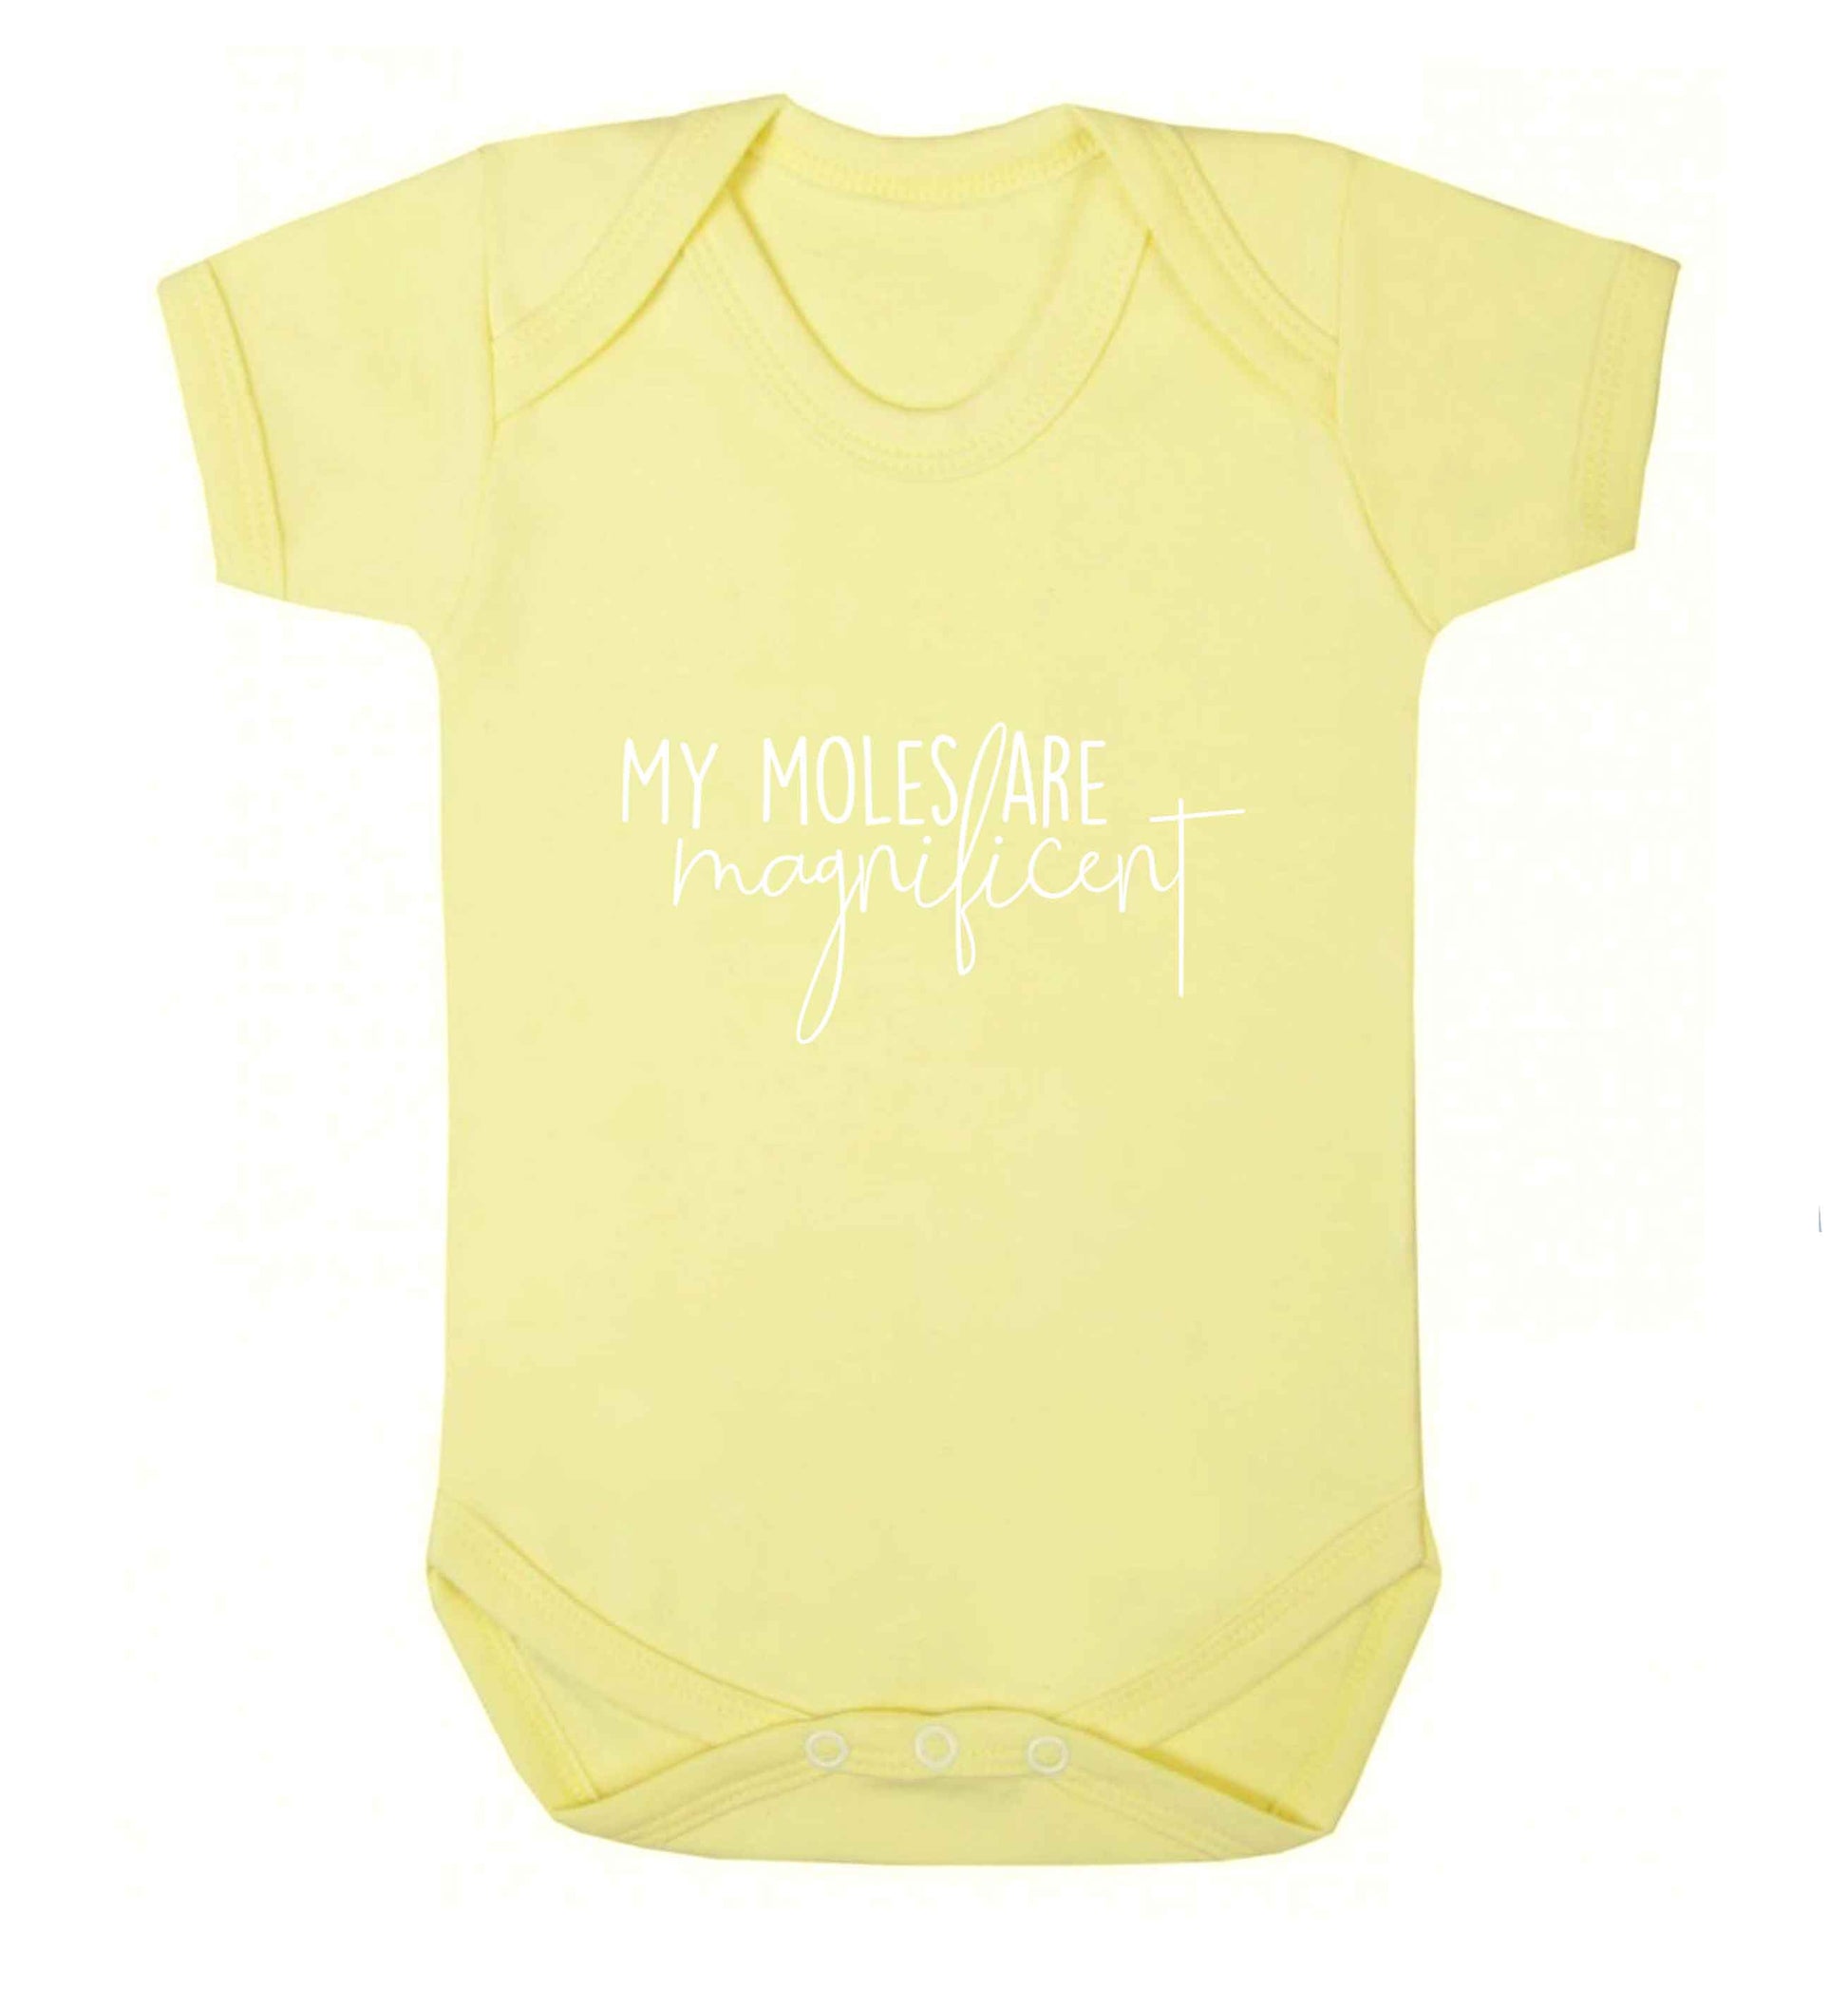 My moles are magnificent baby vest pale yellow 18-24 months